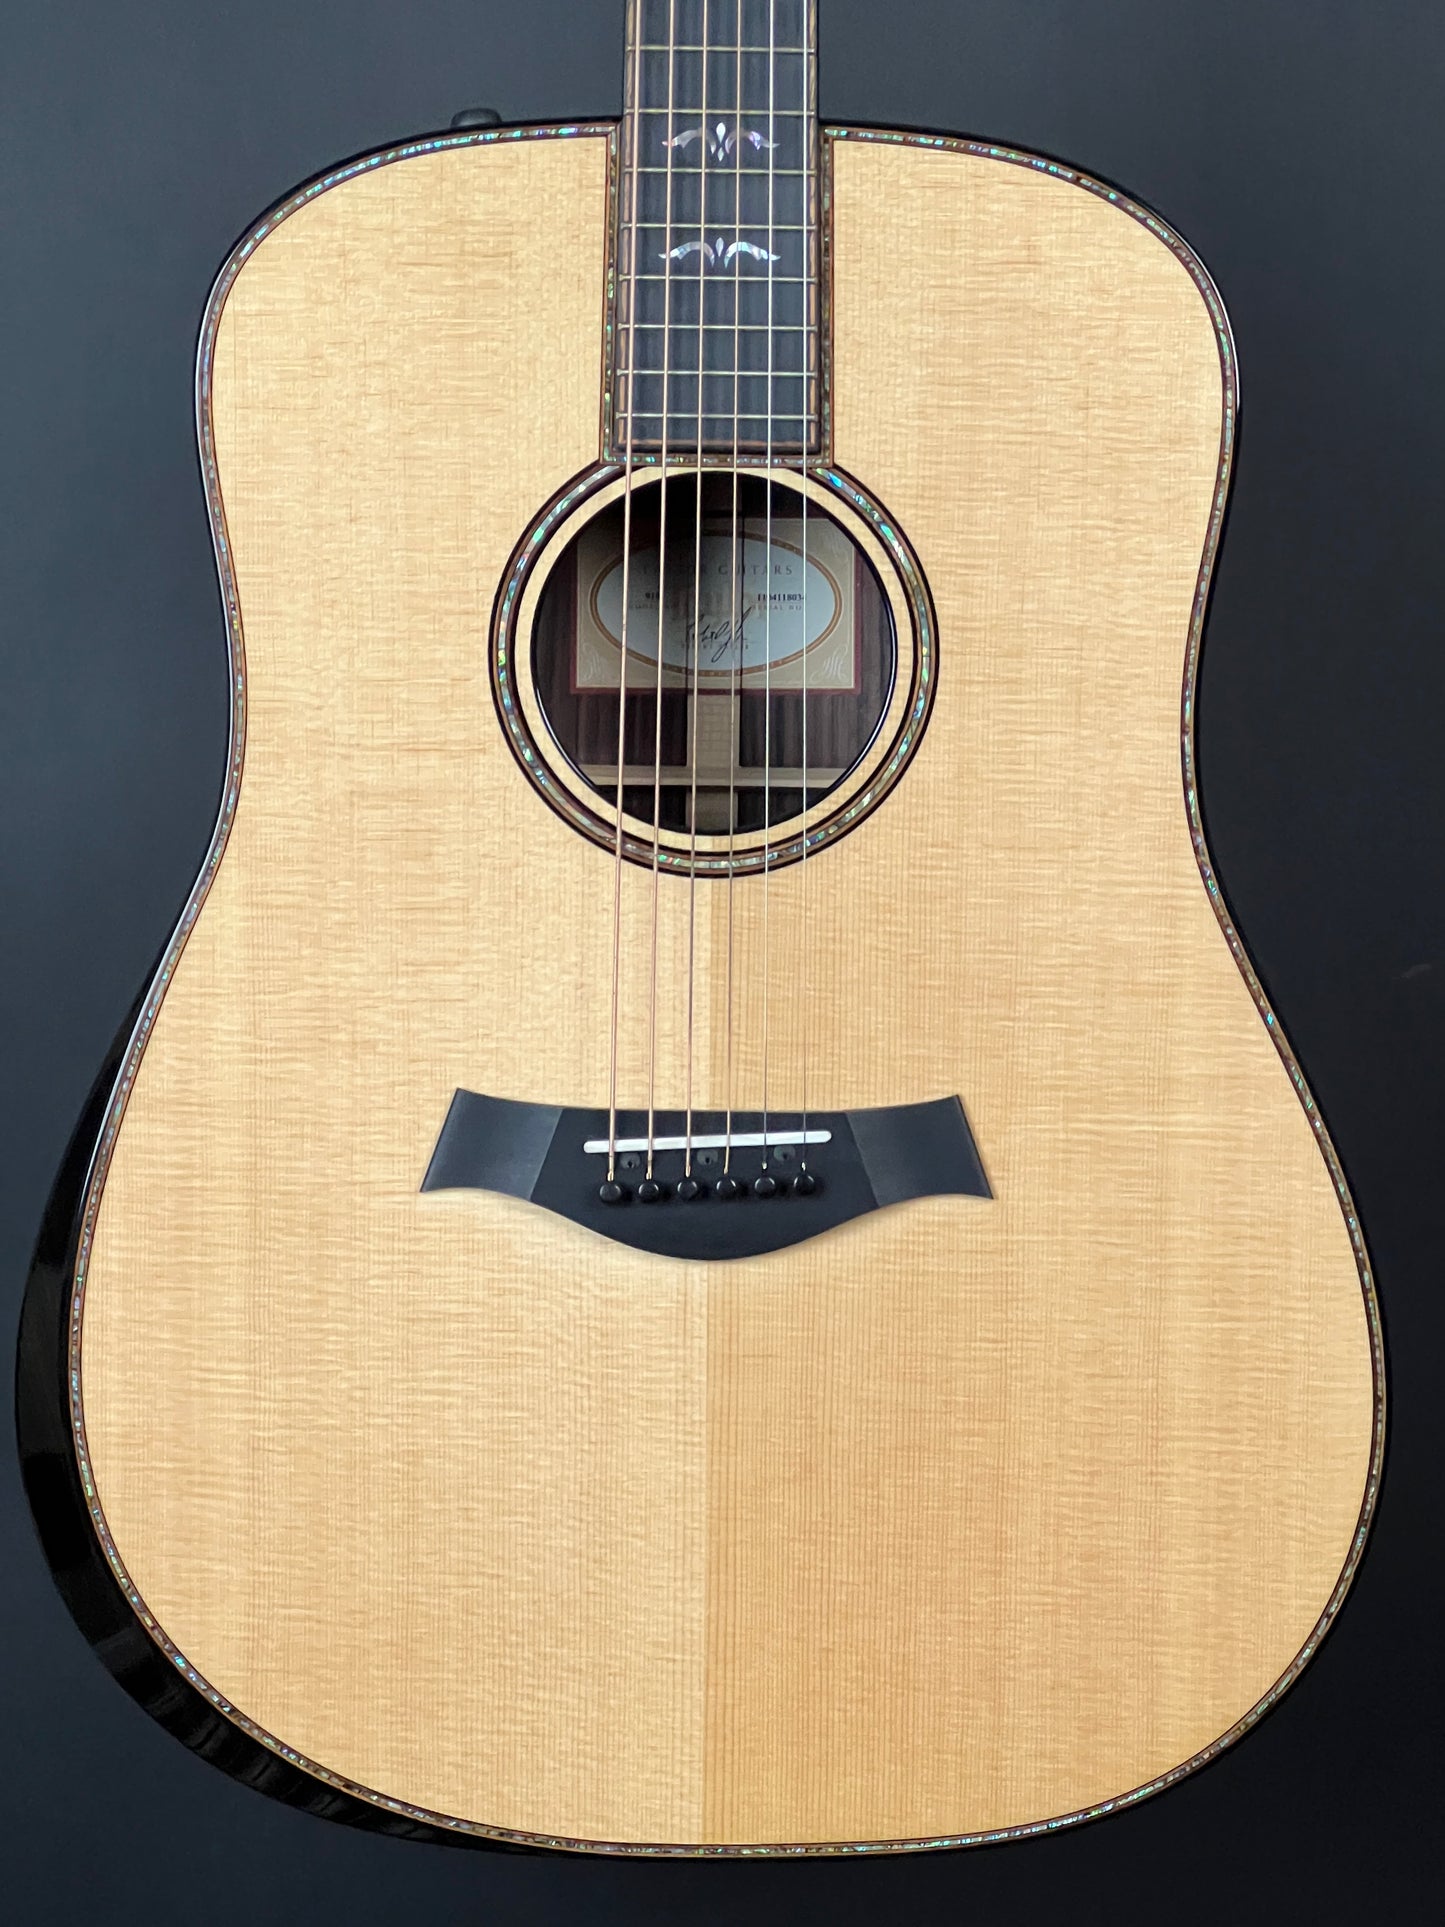 2018 Taylor 910e Acoustic Guitar with Electronics - Used